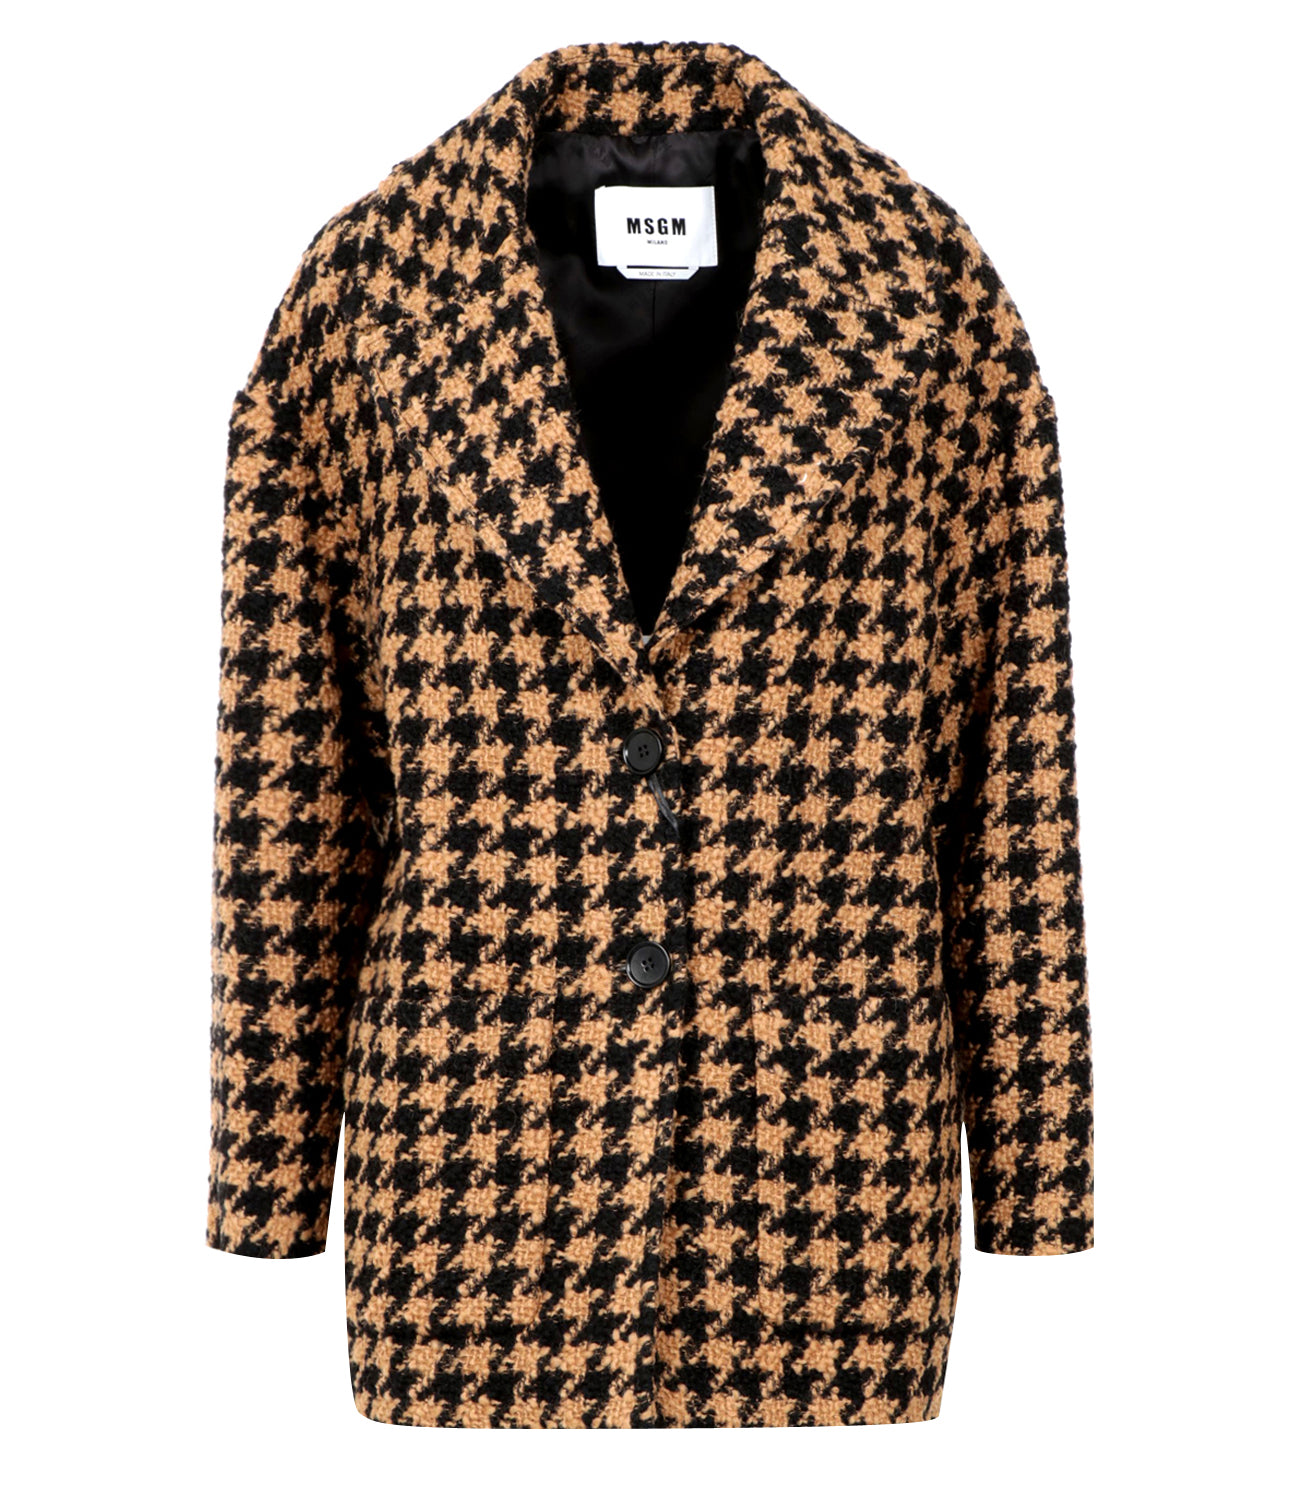 MSGM | Brown and Black Jacket